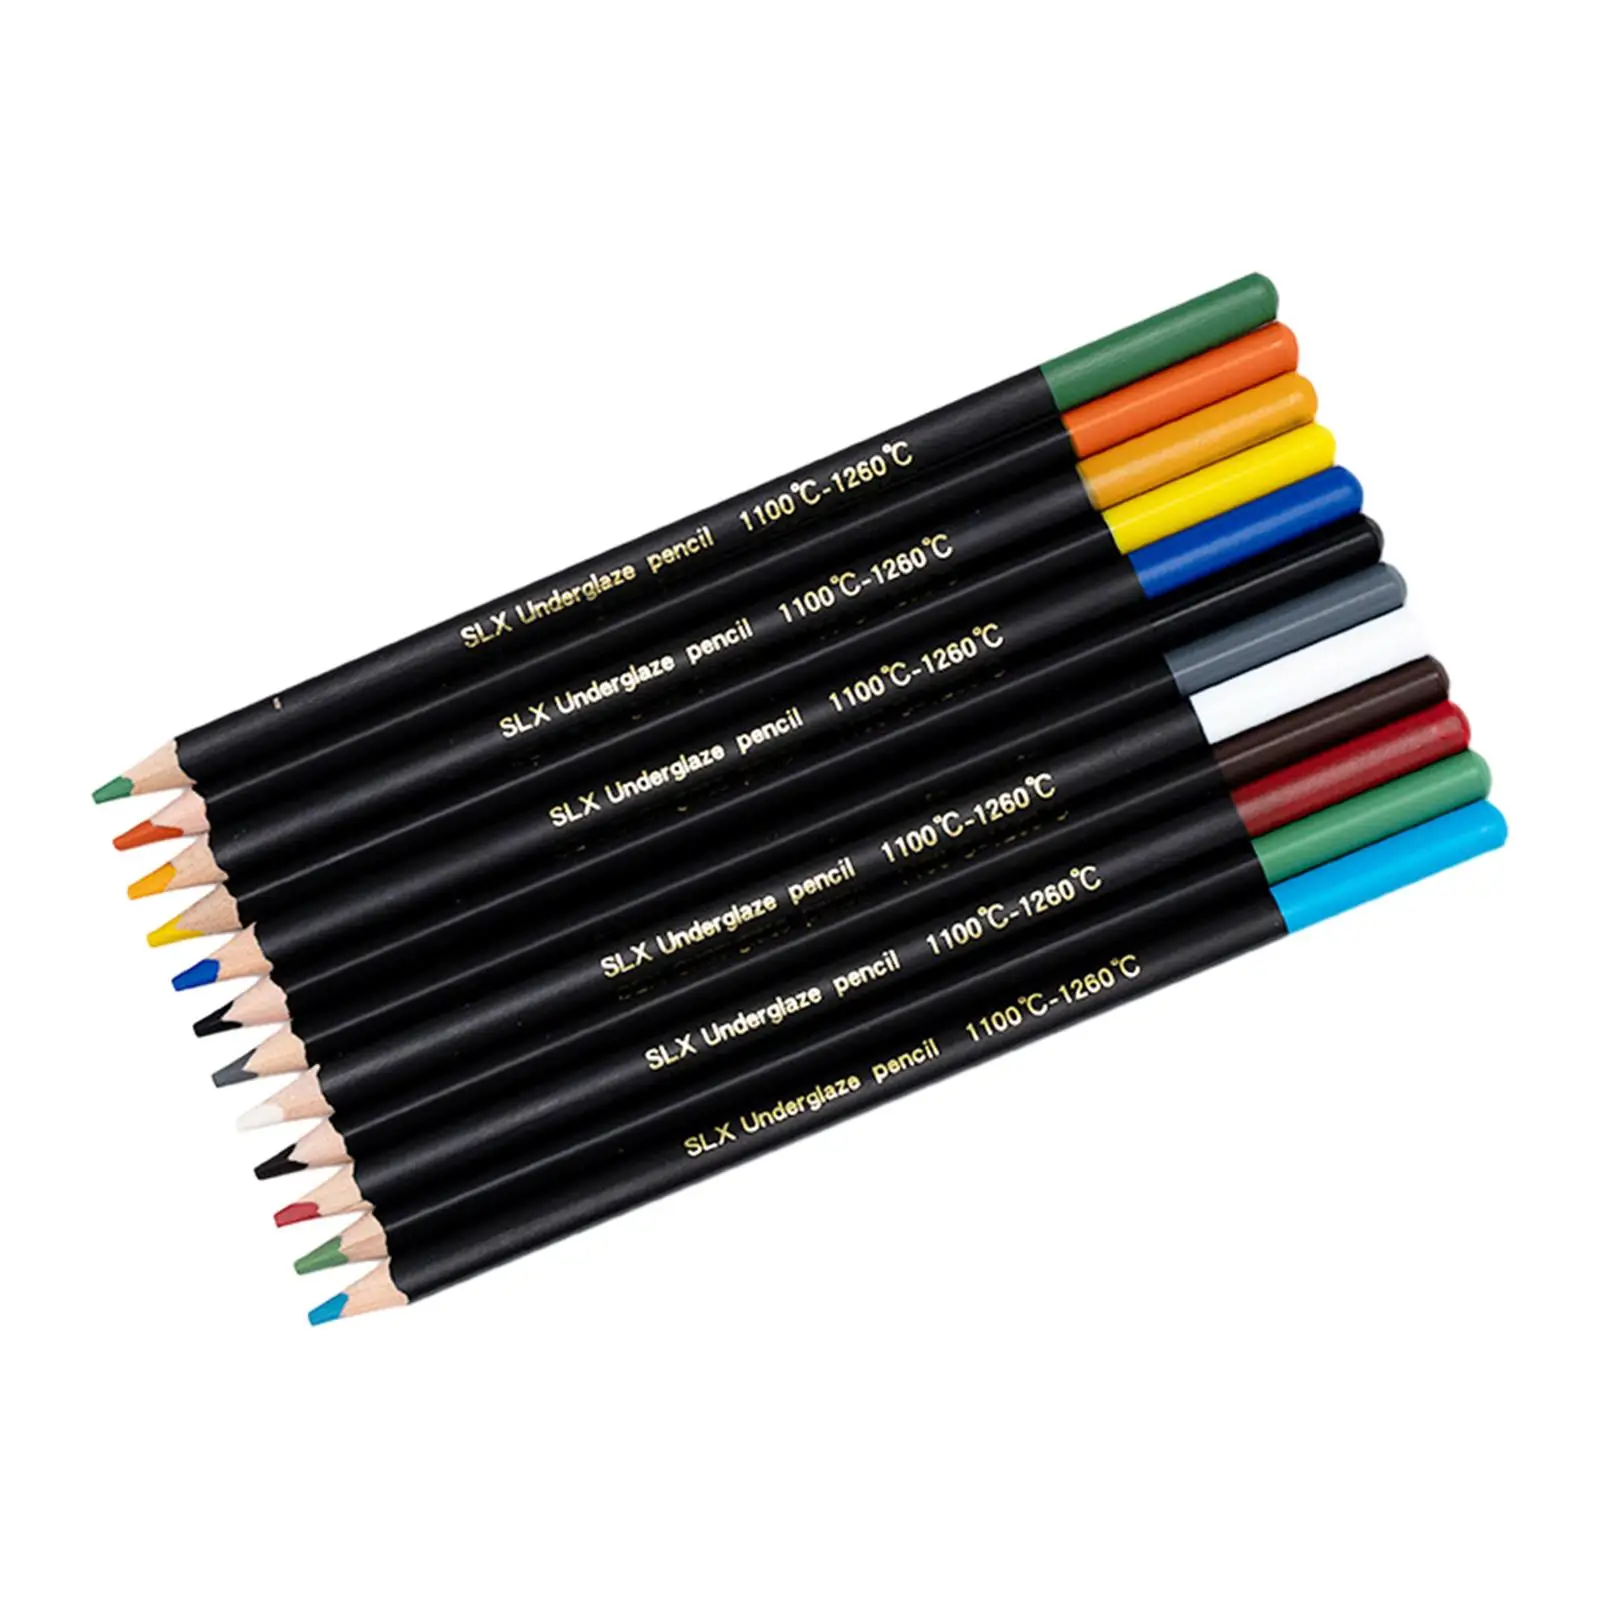 Colored Pencils Professional 12 Colored Coloring Pencils for Hand Painting Sketching Art Craft Supplies Coloring Books Beginners